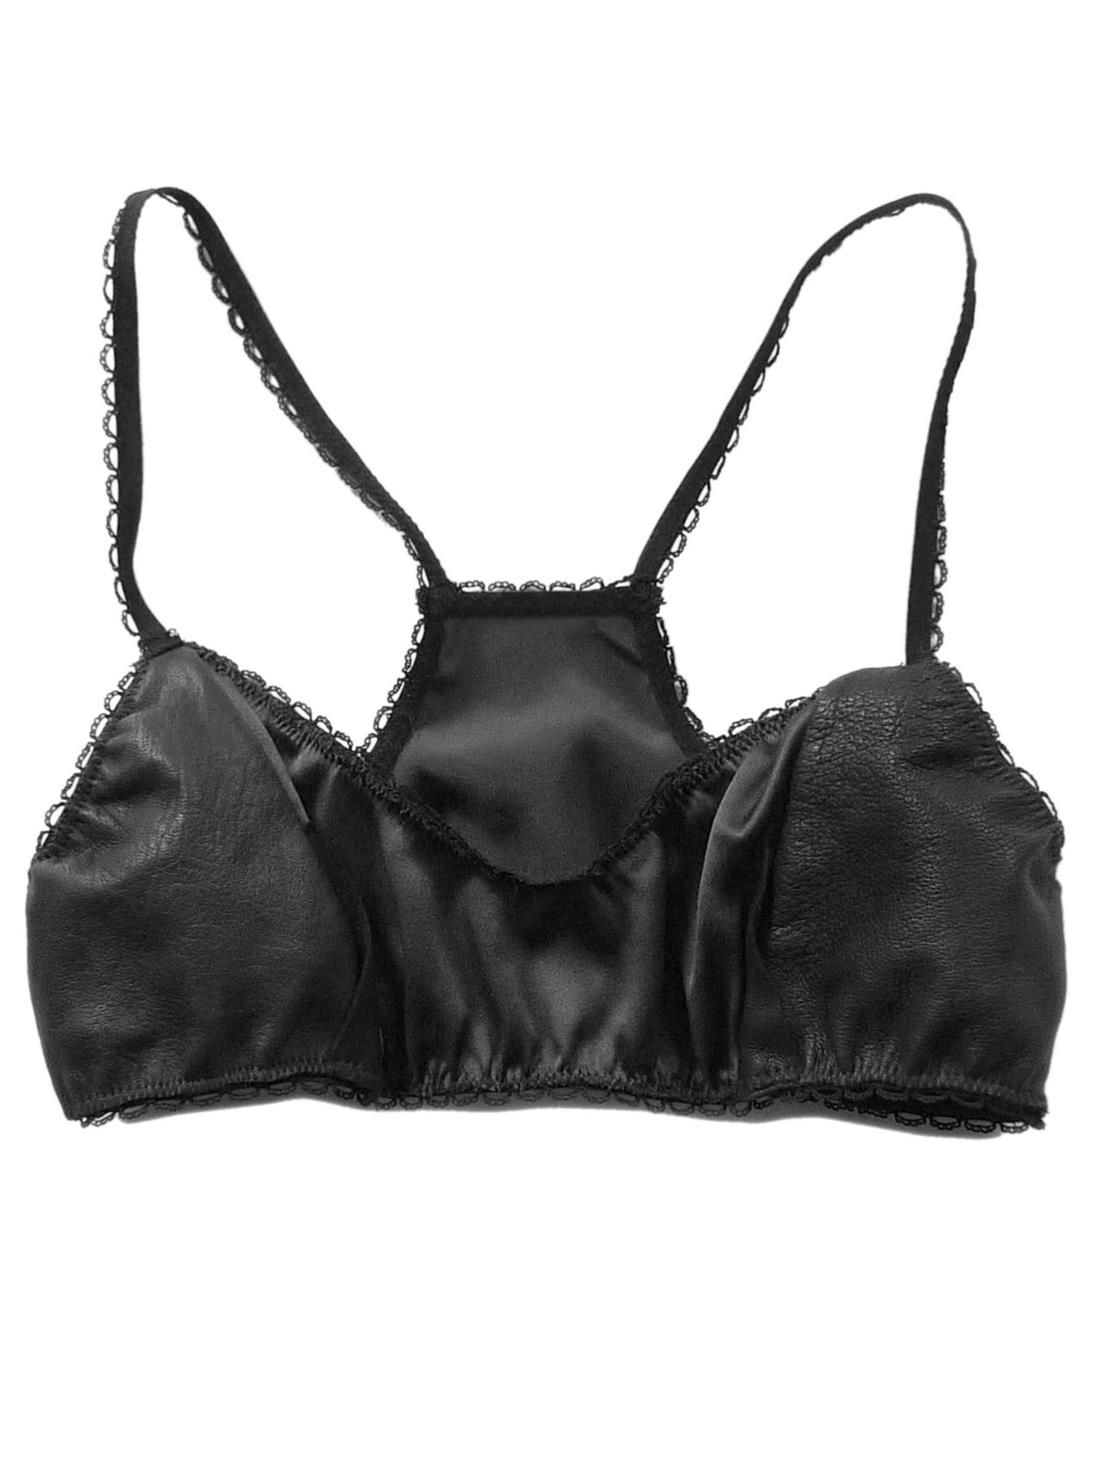 Leather & Silk Bralette – Hasana, Inc.  Purveyors of fine jewellery,  designer fashion, designer clothes, shoes, bags, accessories, bespoke items  & more for men and women.